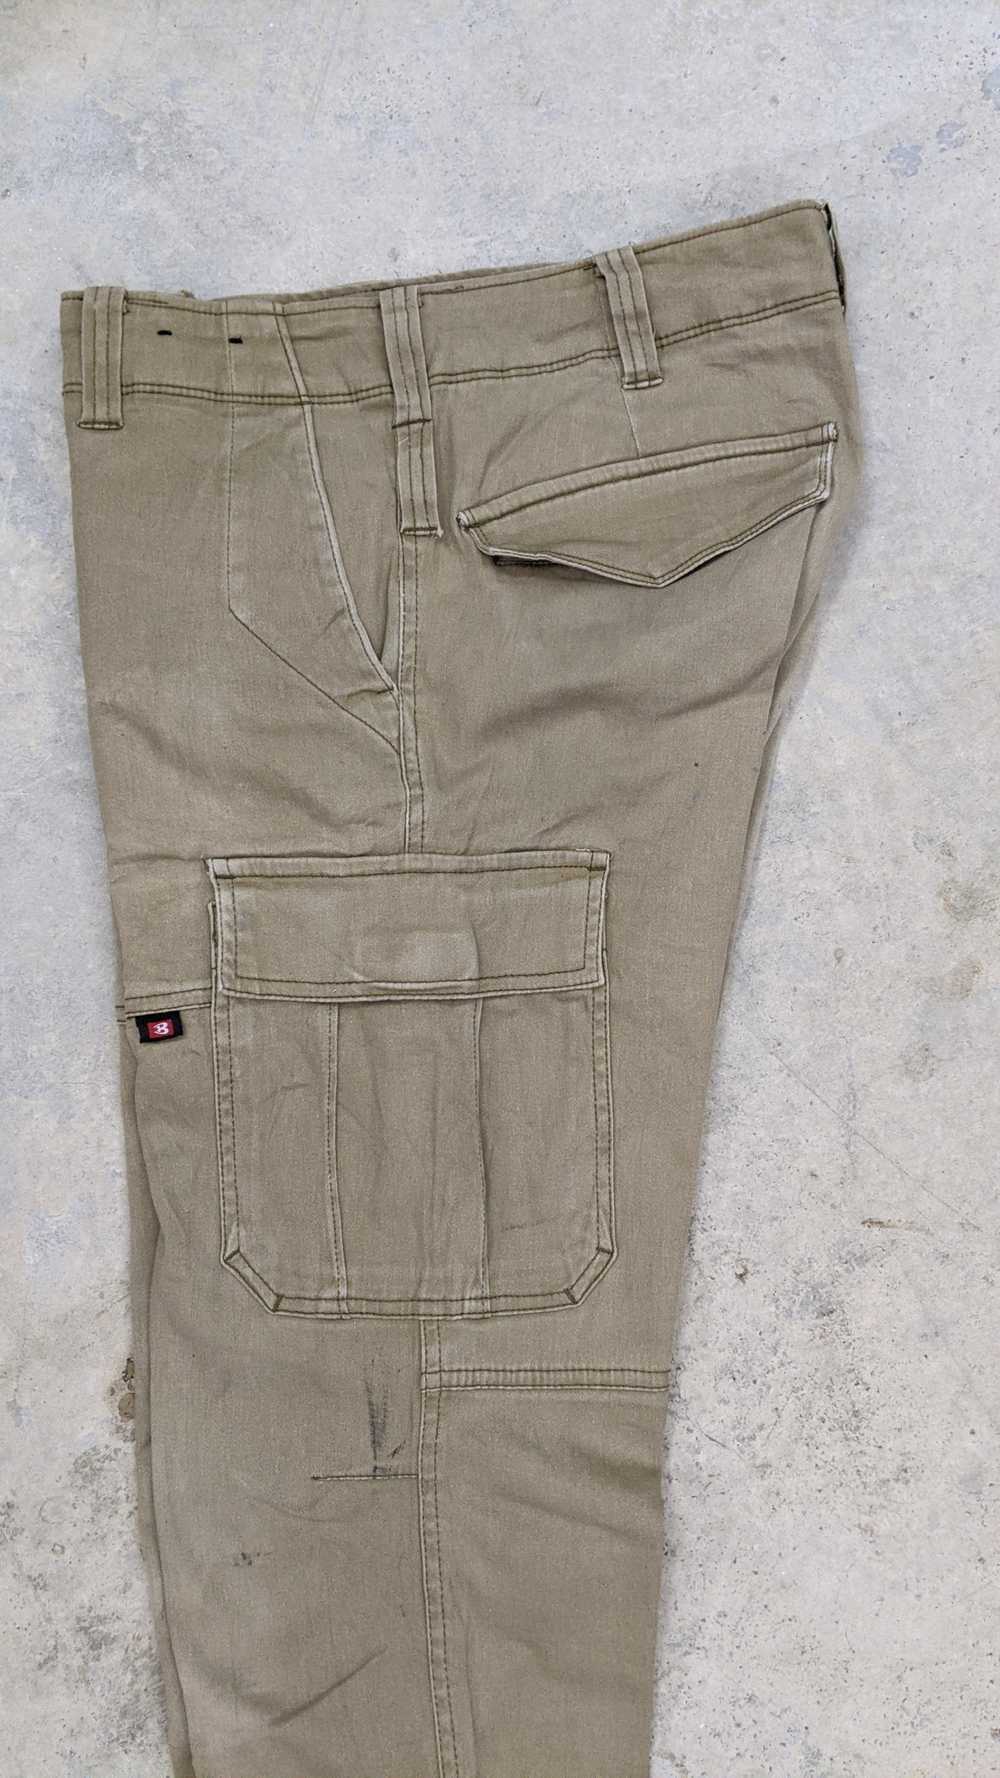 online at low prices Burtle Multipocket distressed Tactical Cargo